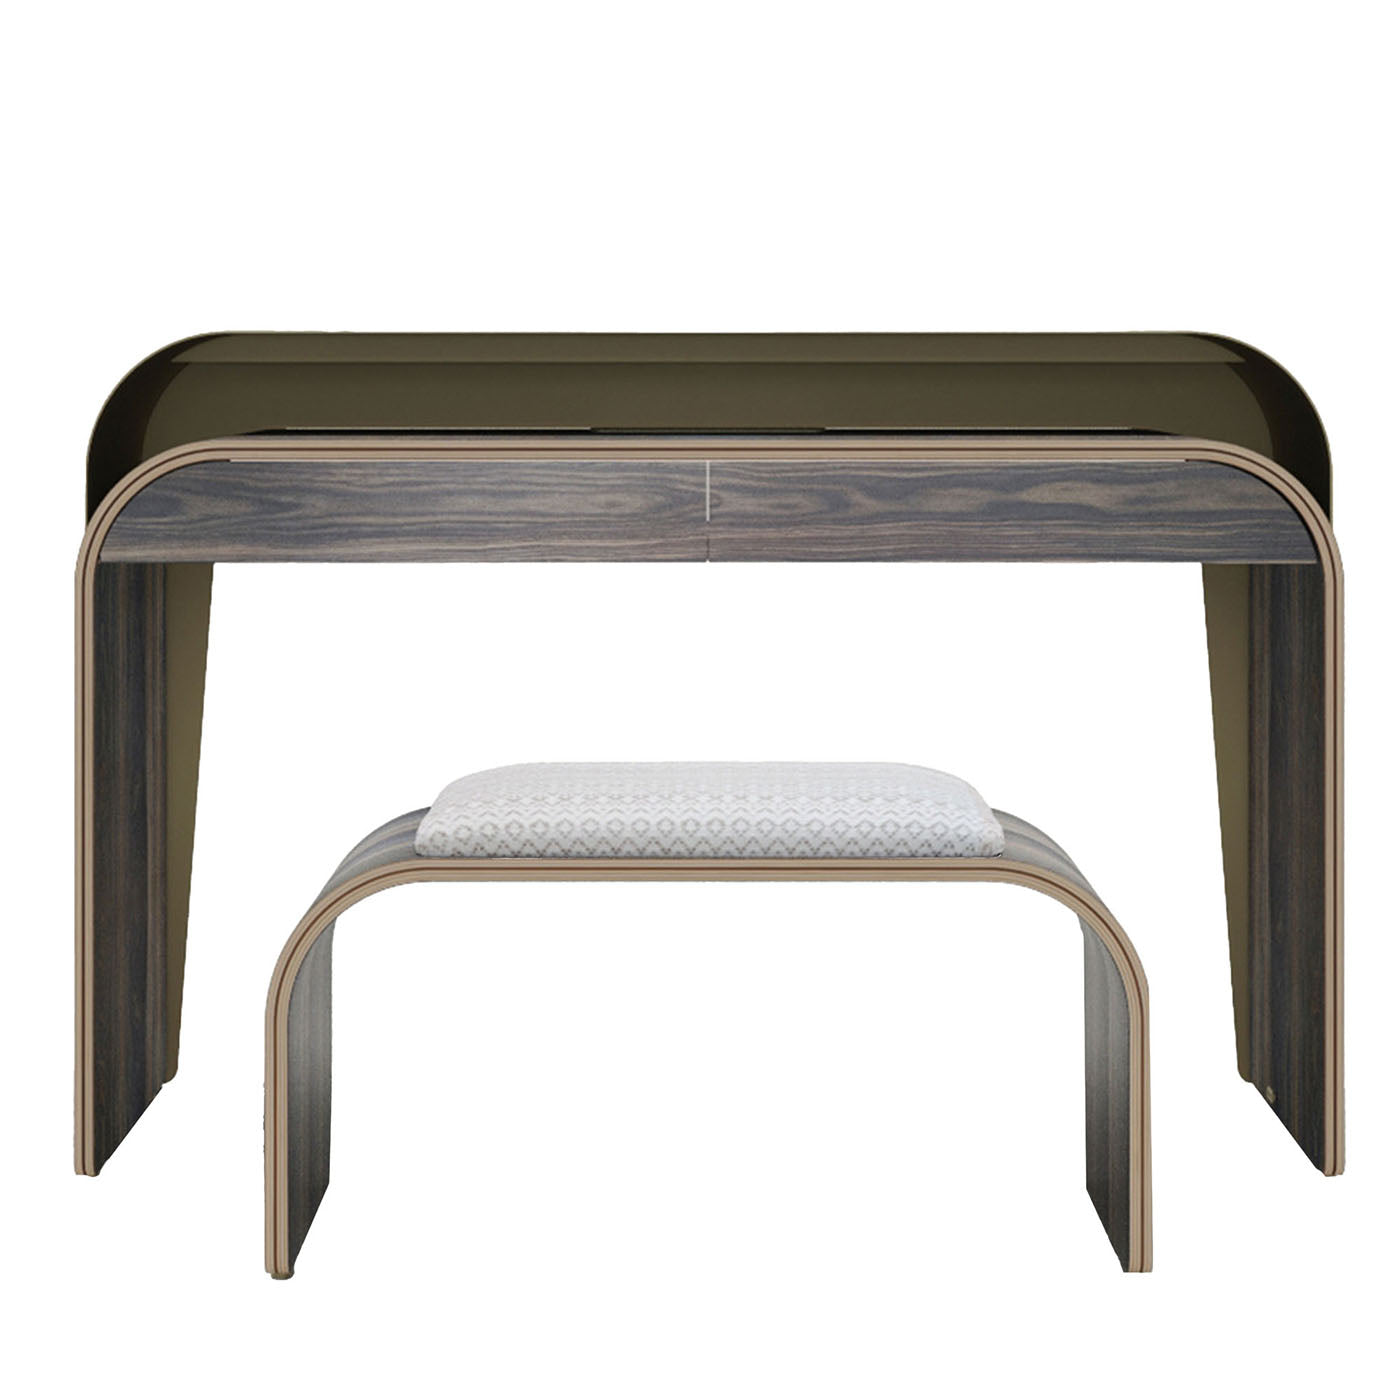 Derj Wooden Console and Bench - Main view